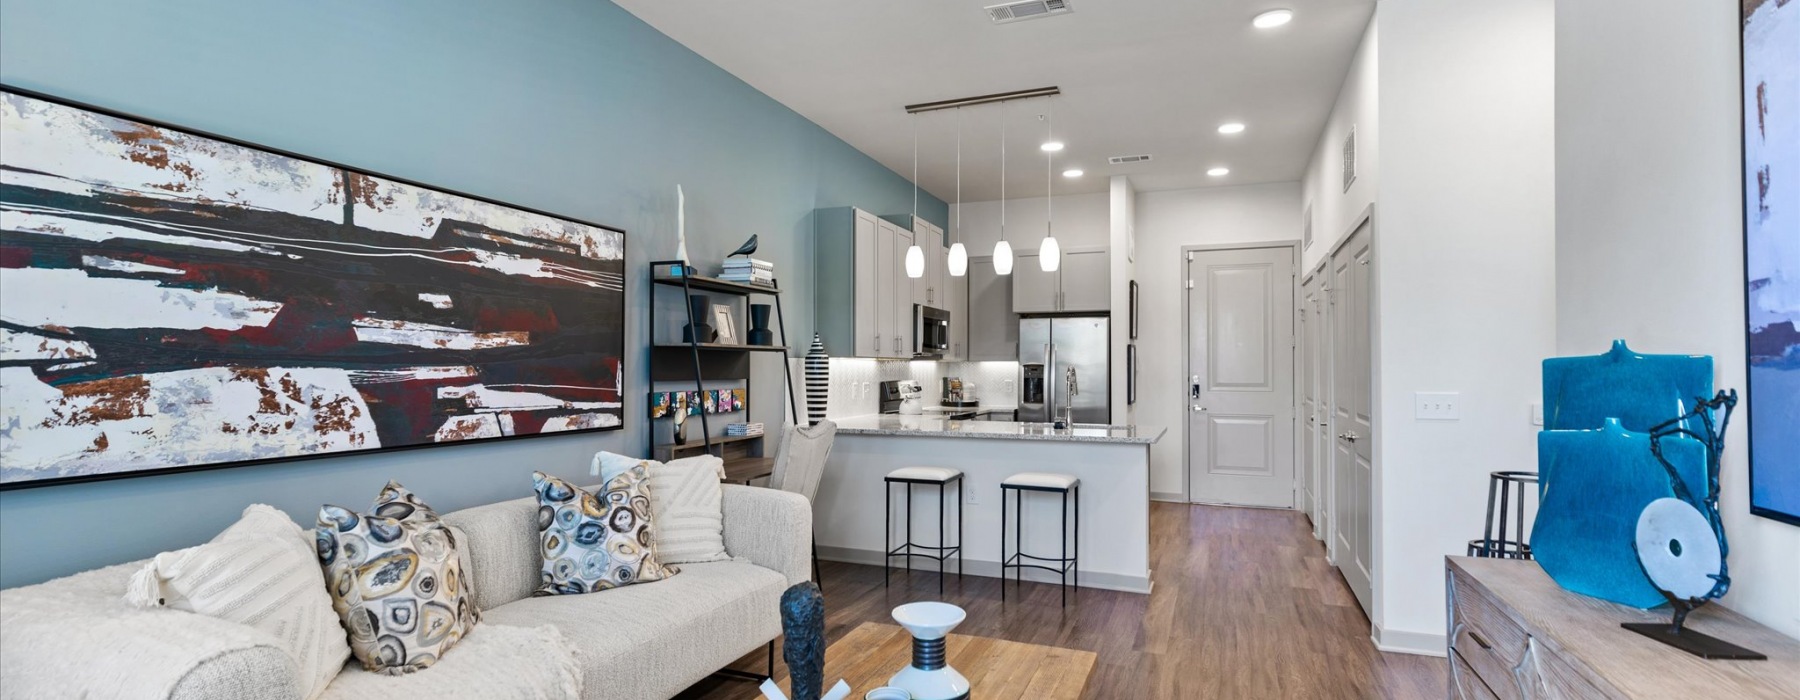 A modern open-concept living space with kitchen island at McKinney Terrace 1- to 3-bedroom apartments in McKinney, TX.